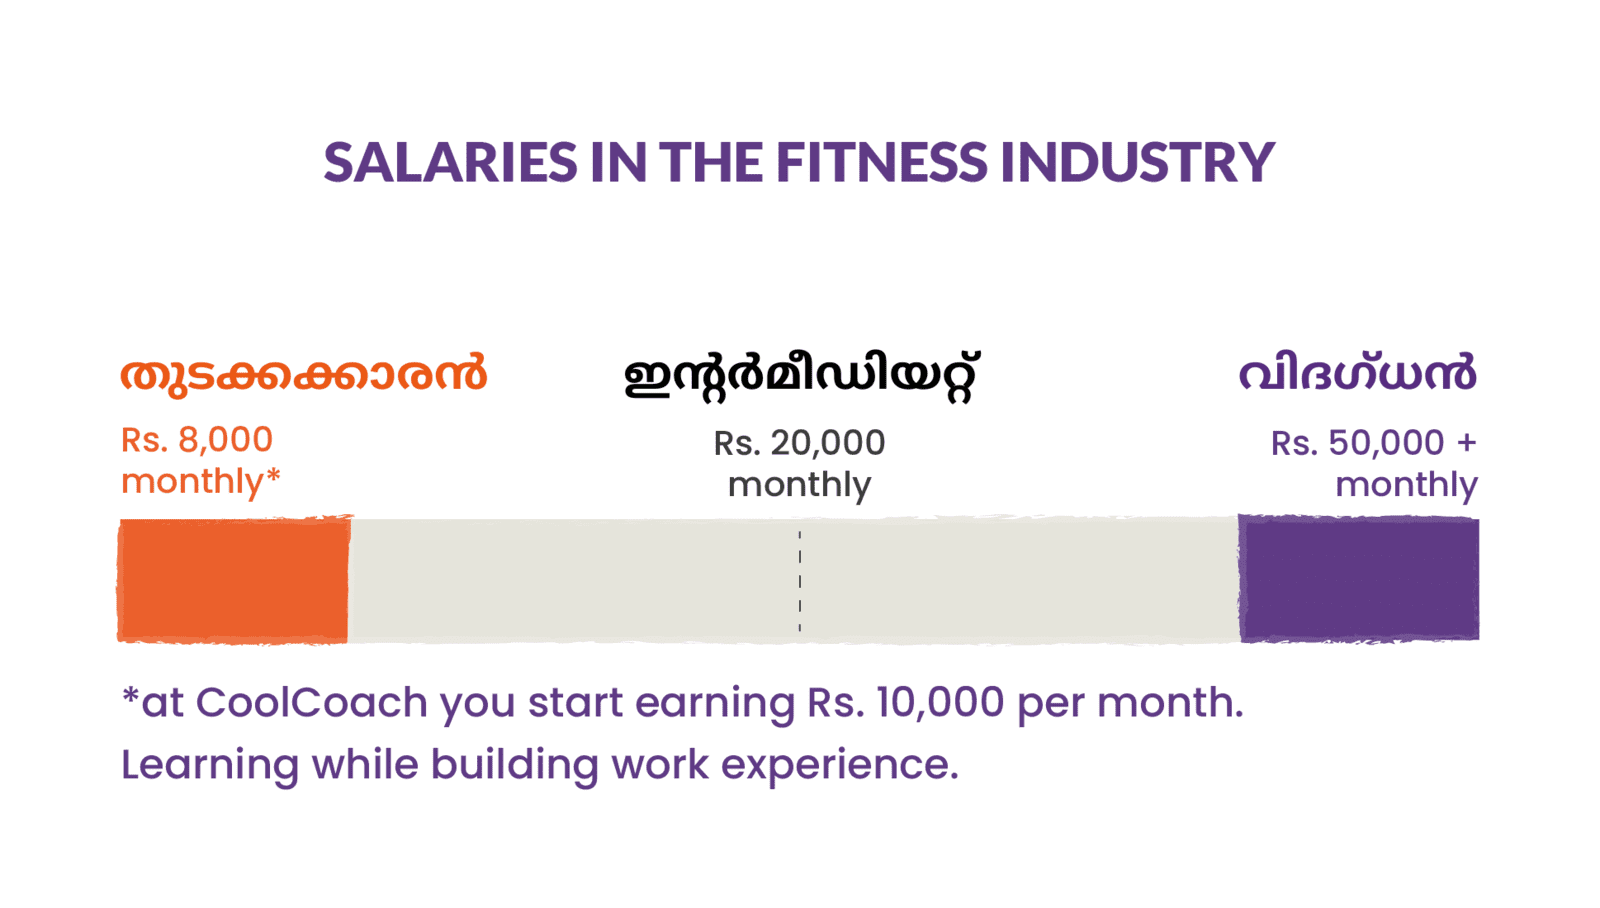 Salary in the fitness industry